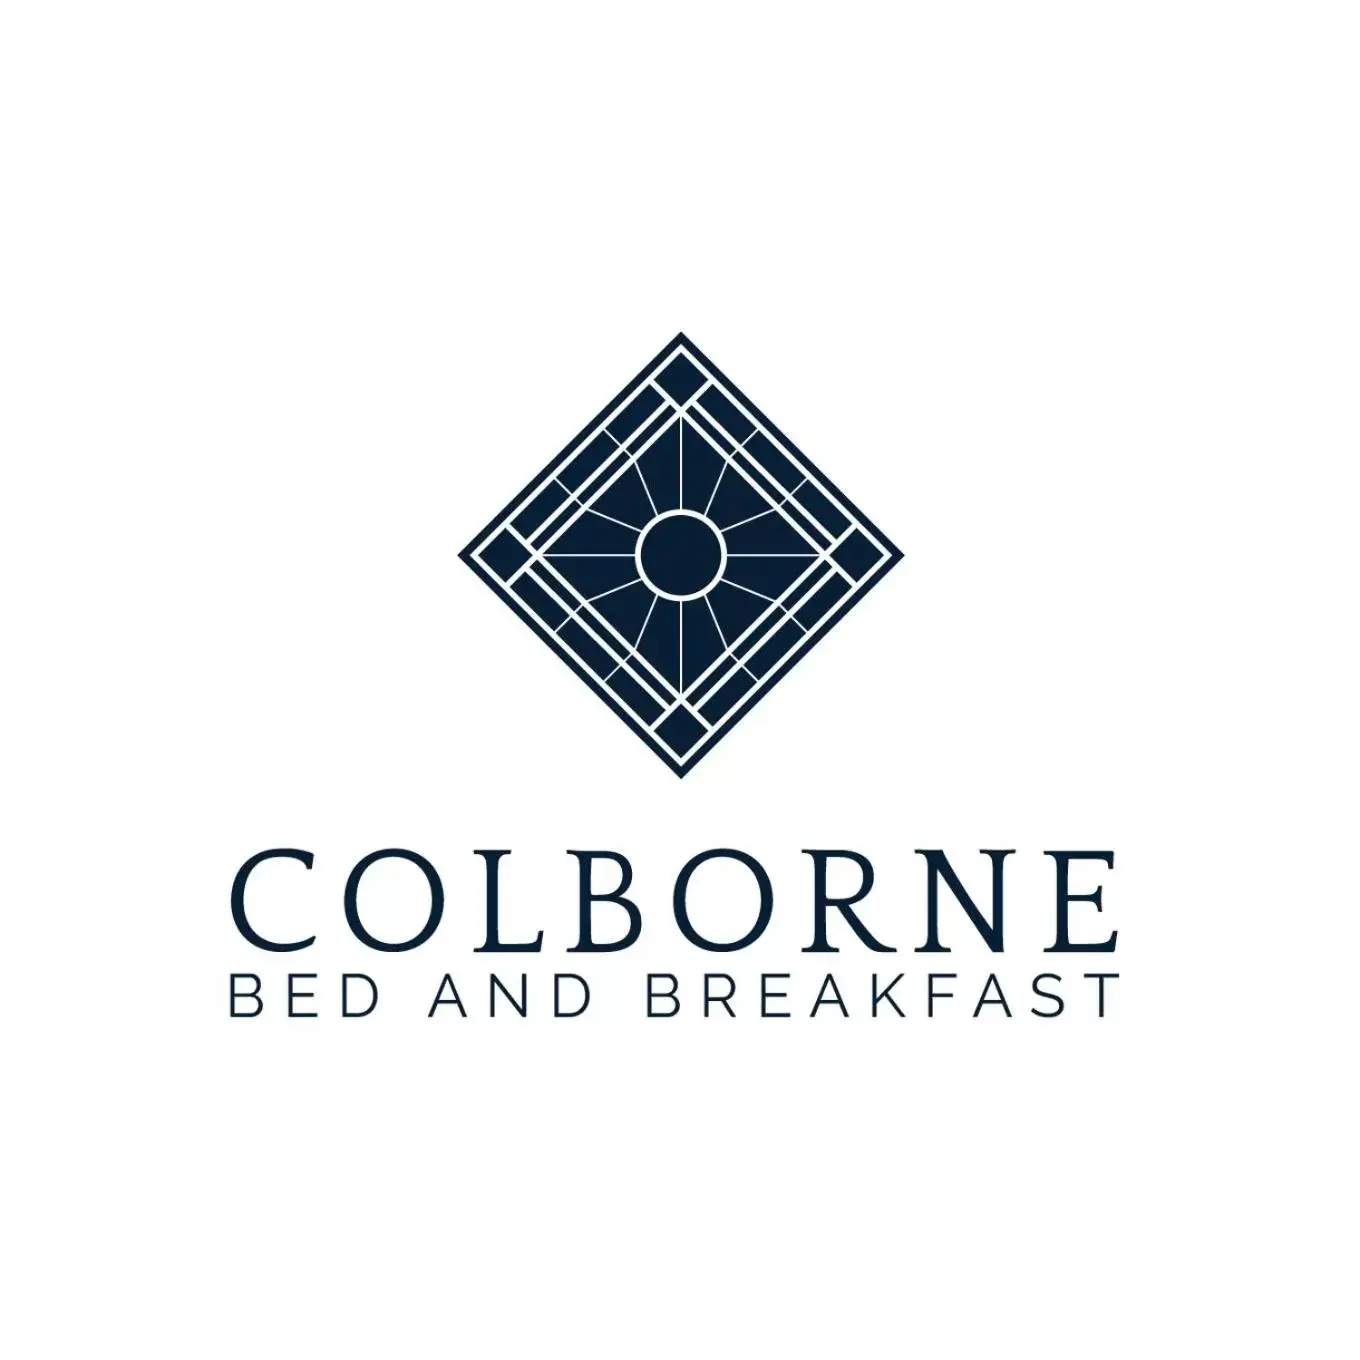 Property logo or sign in Colborne Bed and Breakfast